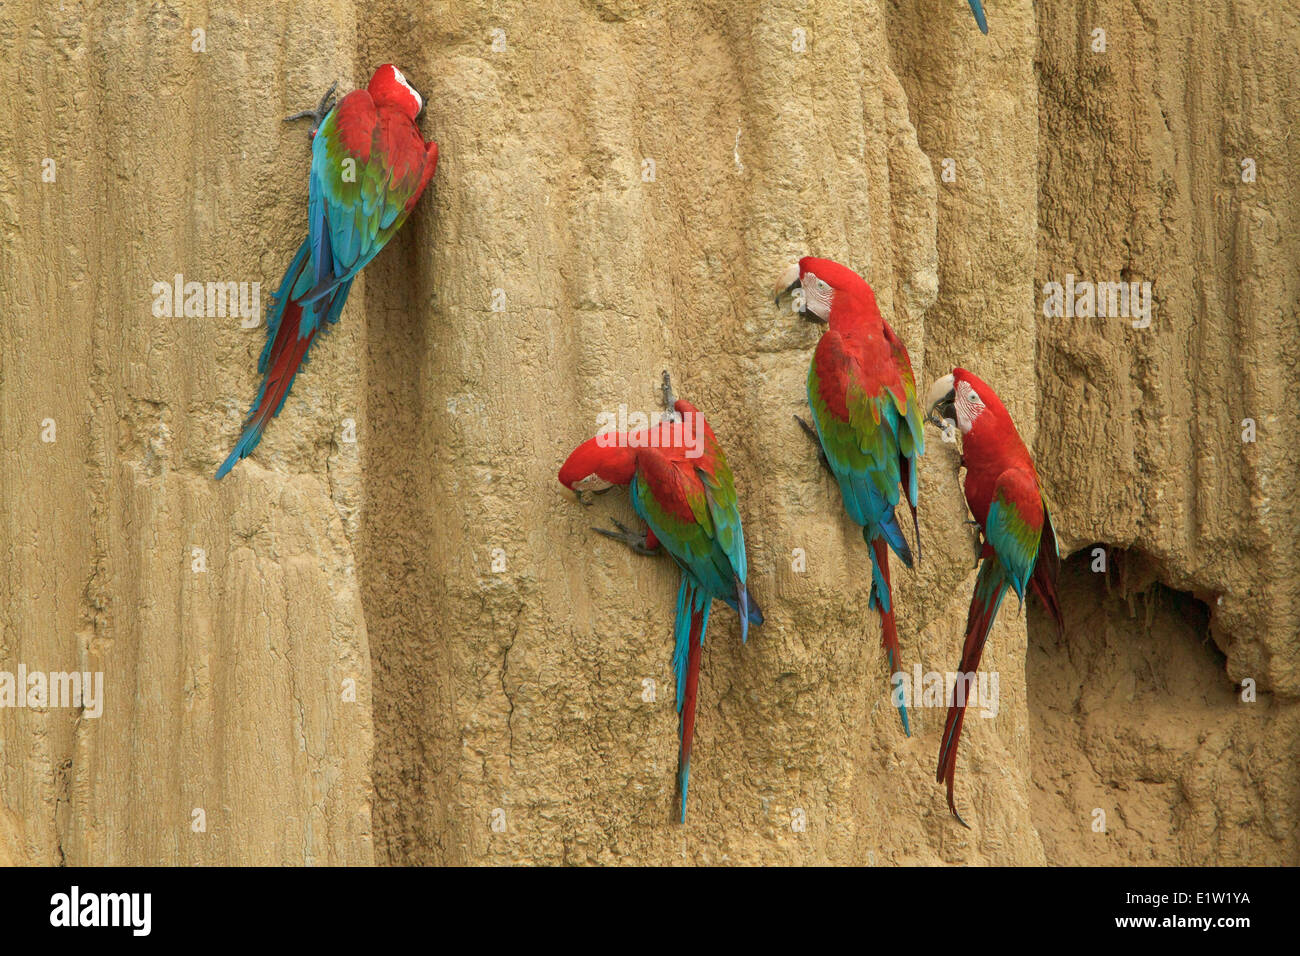 Red-and-green Macaw (Ara chloroptera) perched and feeding on clay in Amazonian Peru. Stock Photo